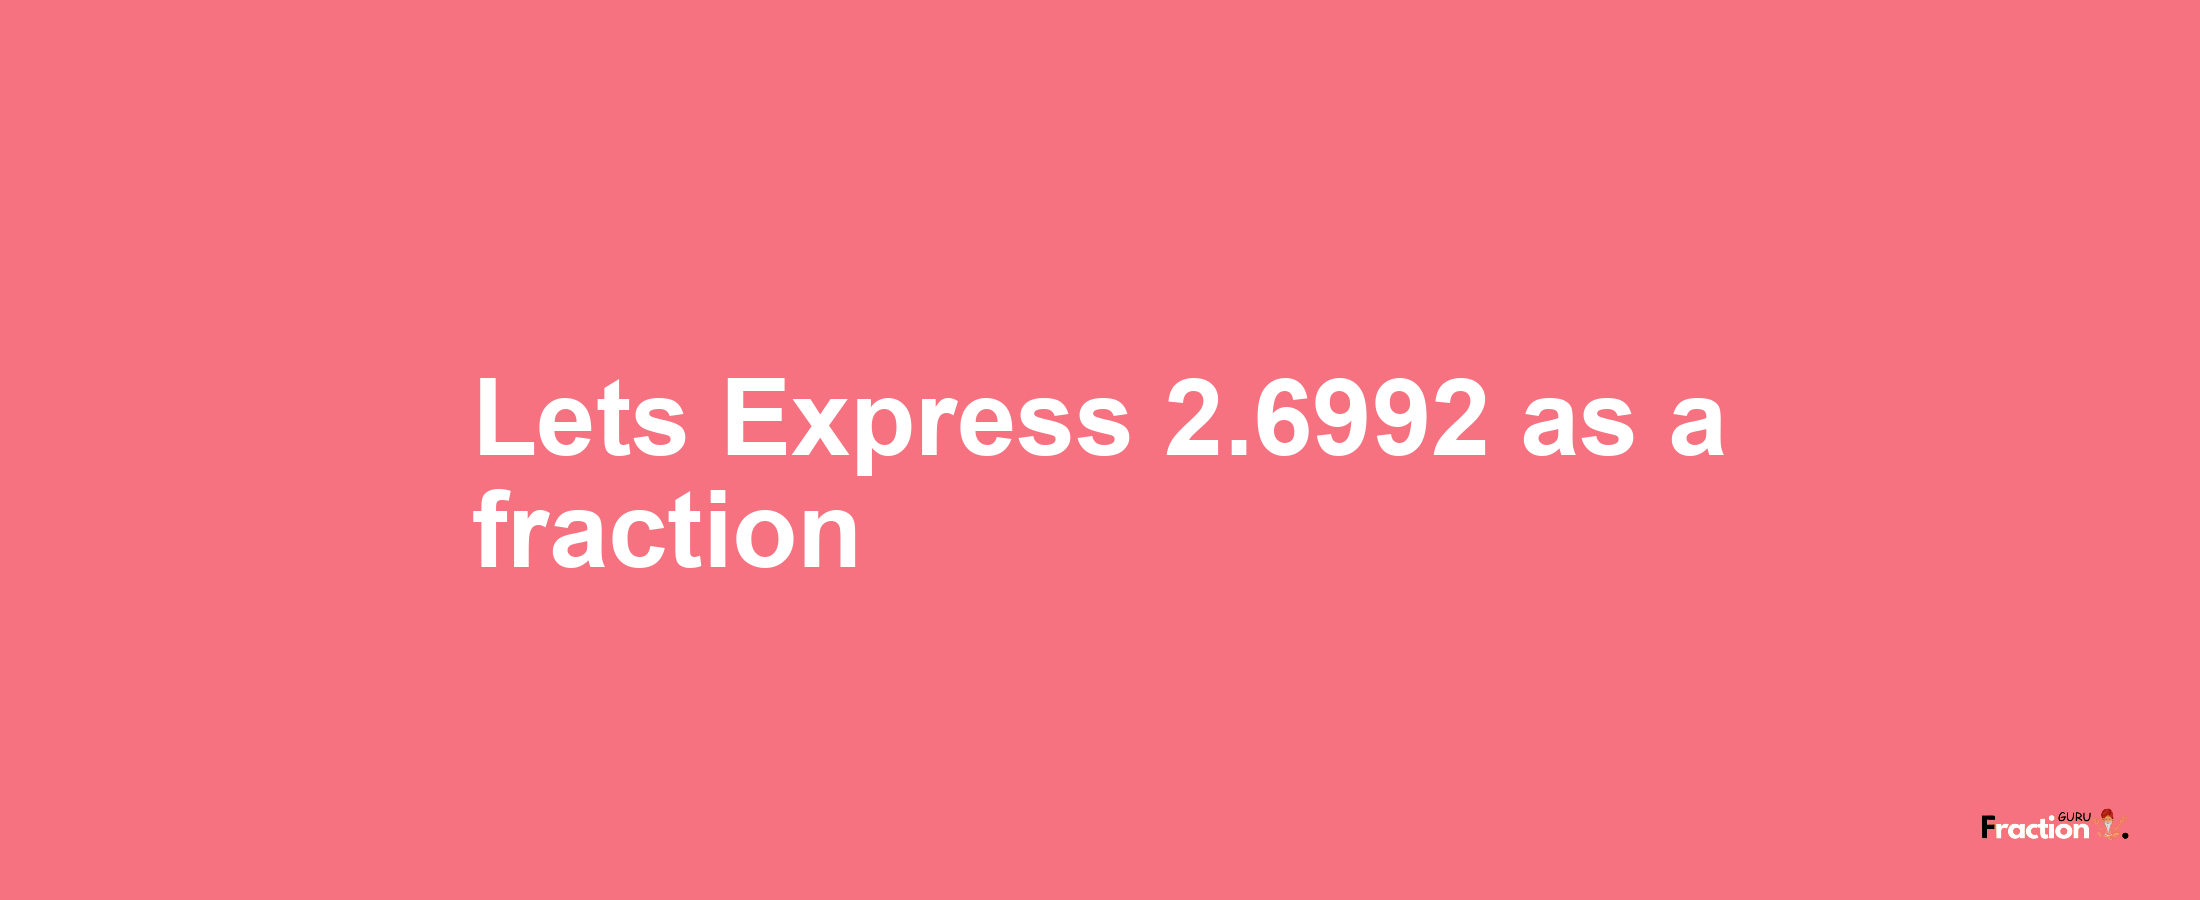 Lets Express 2.6992 as afraction